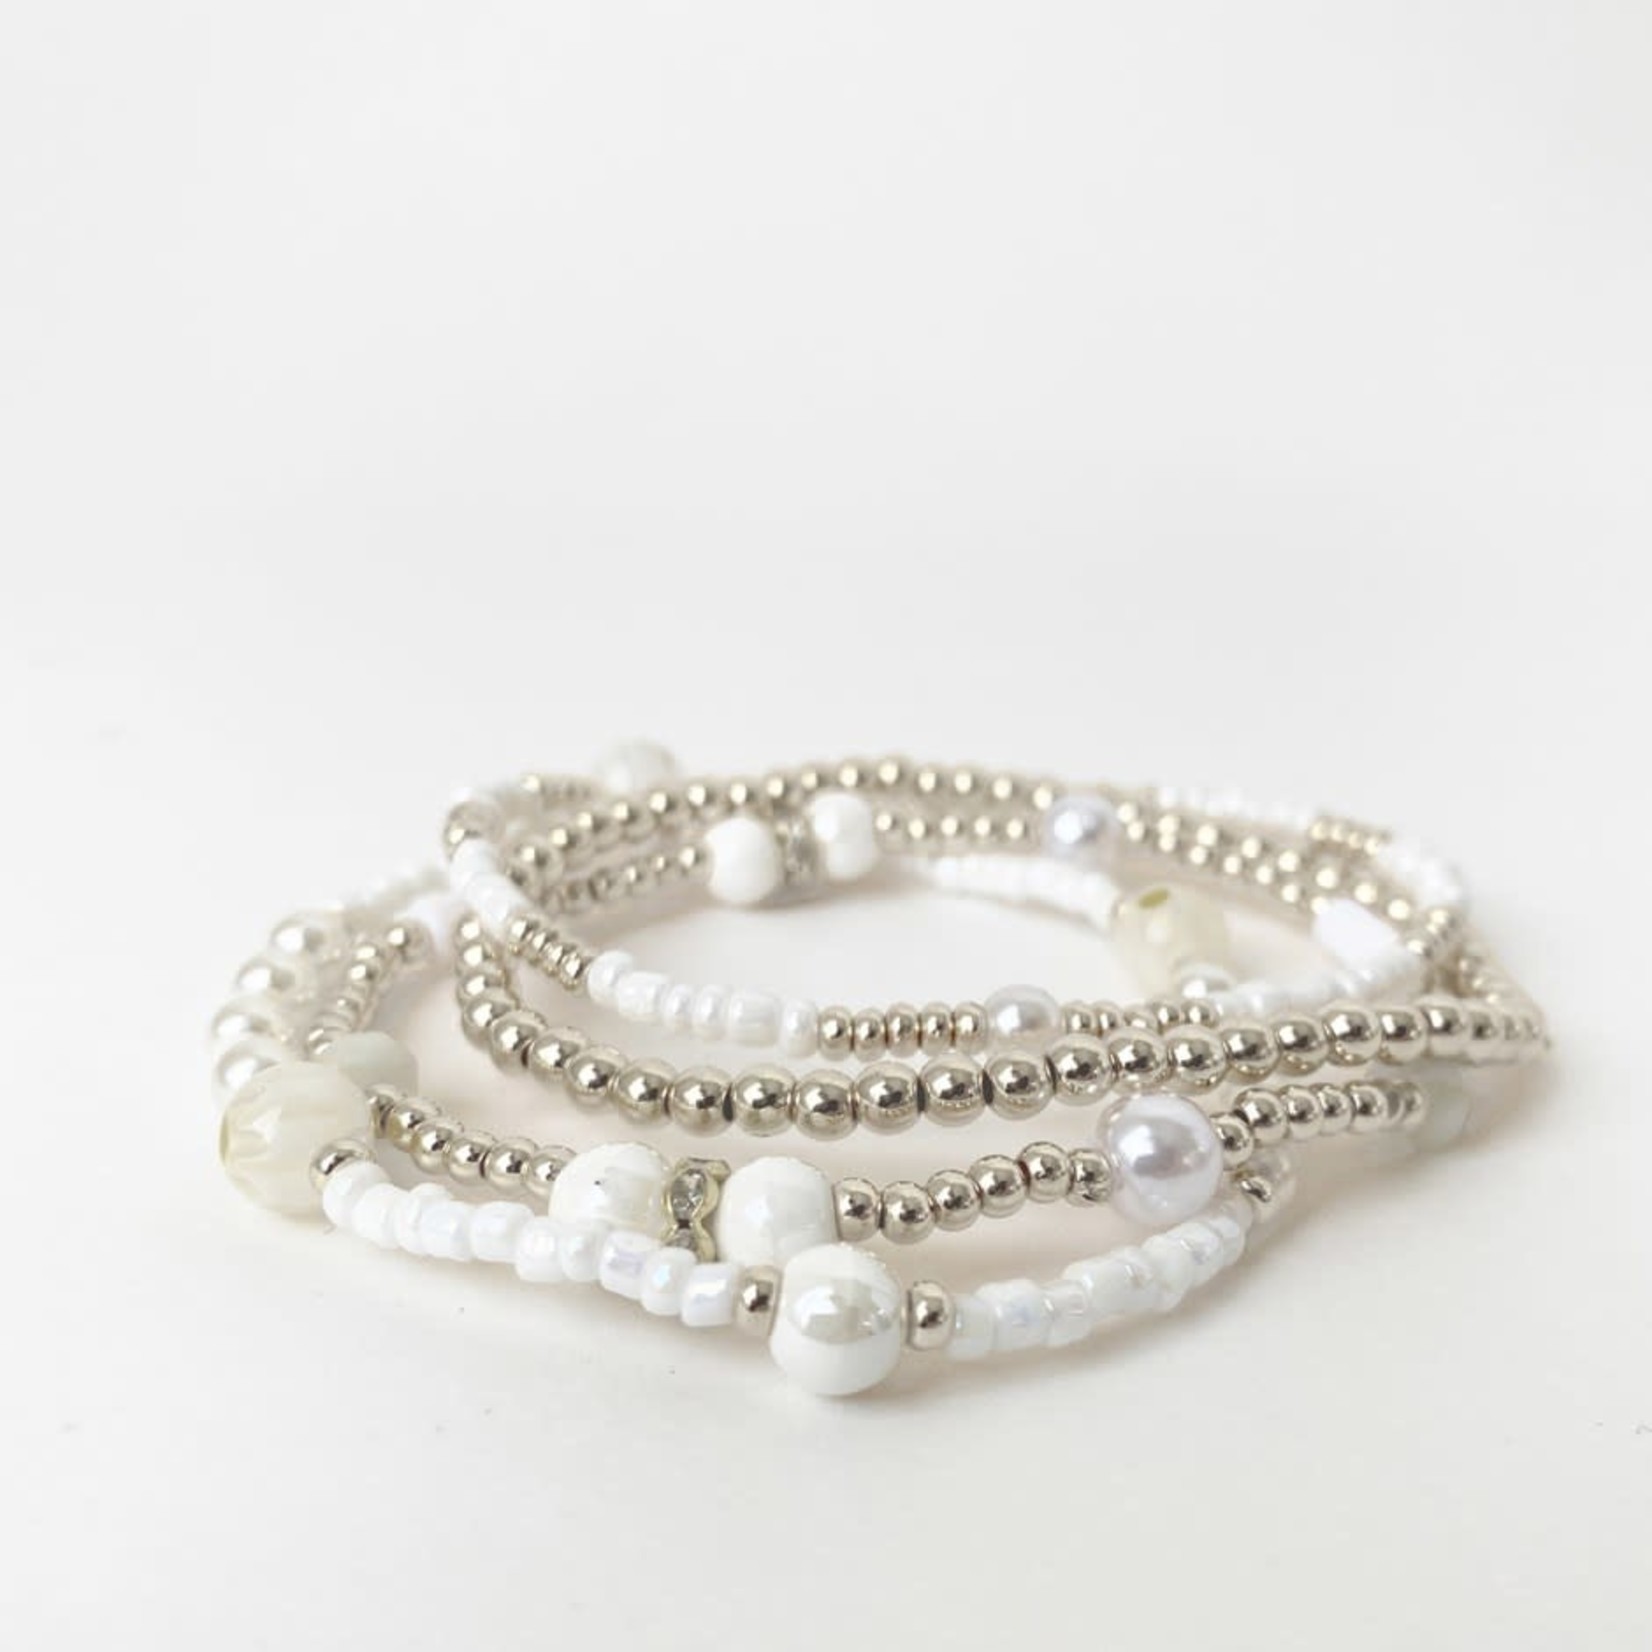 SILVER 3 ROWS BRACELET ON ELASTIC WITH GLASS, FAUX PEARLS & METAL BEADS